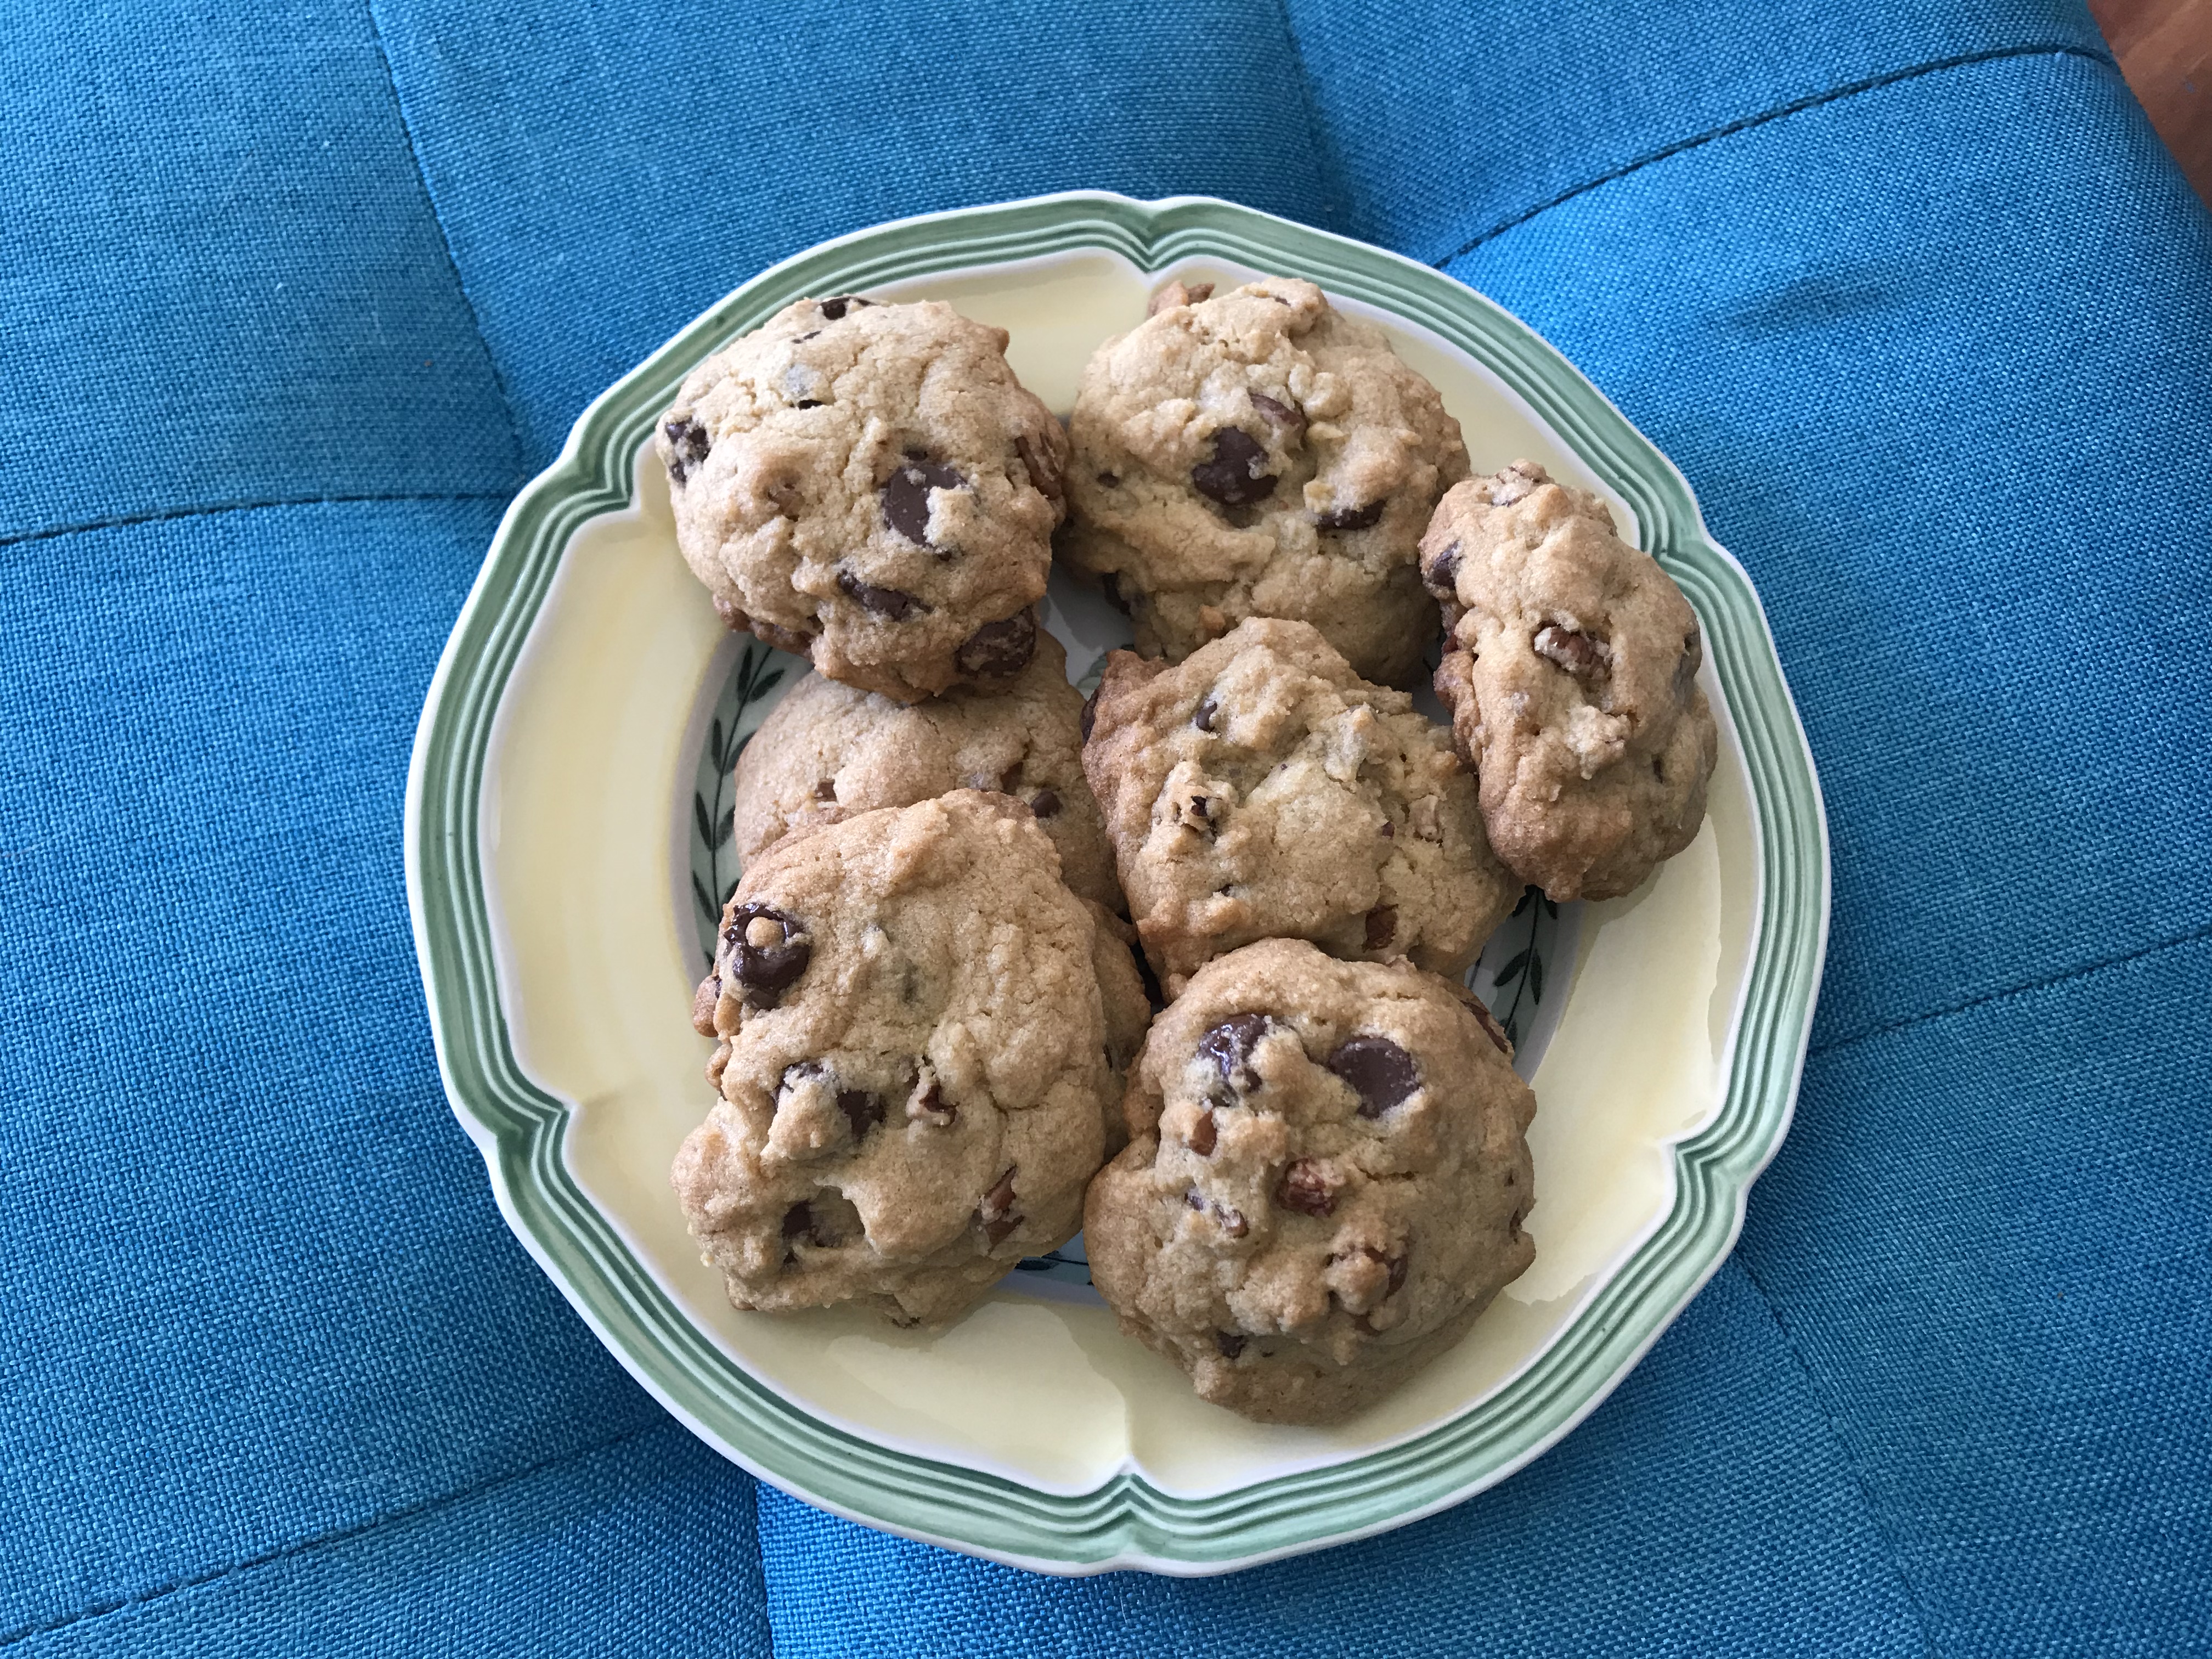 Original Nestle® Toll House Chocolate Chip Cookies image